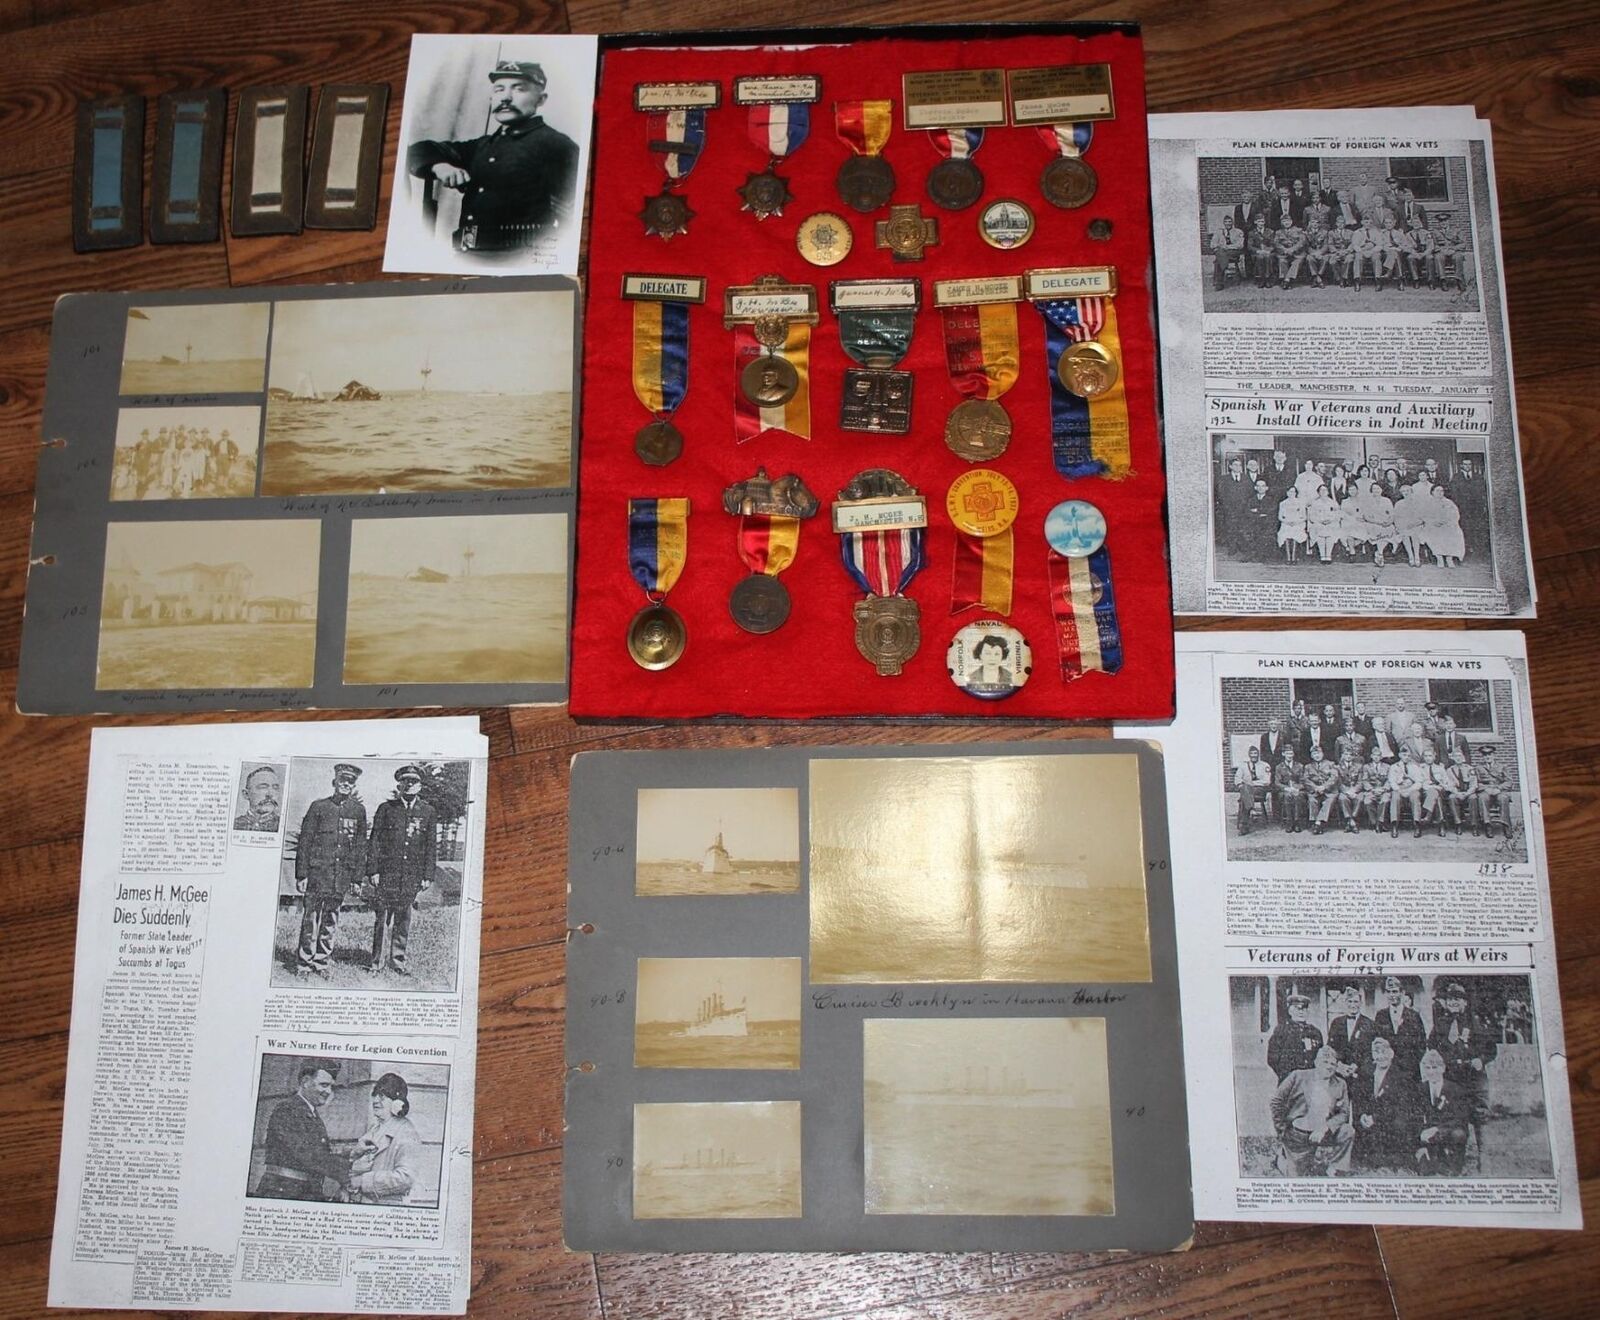 SPANISH AMERICAN OFFICER JAMES H McGEE SHOULDER STRAPS, PINS, PHOTOS, ARTICLES